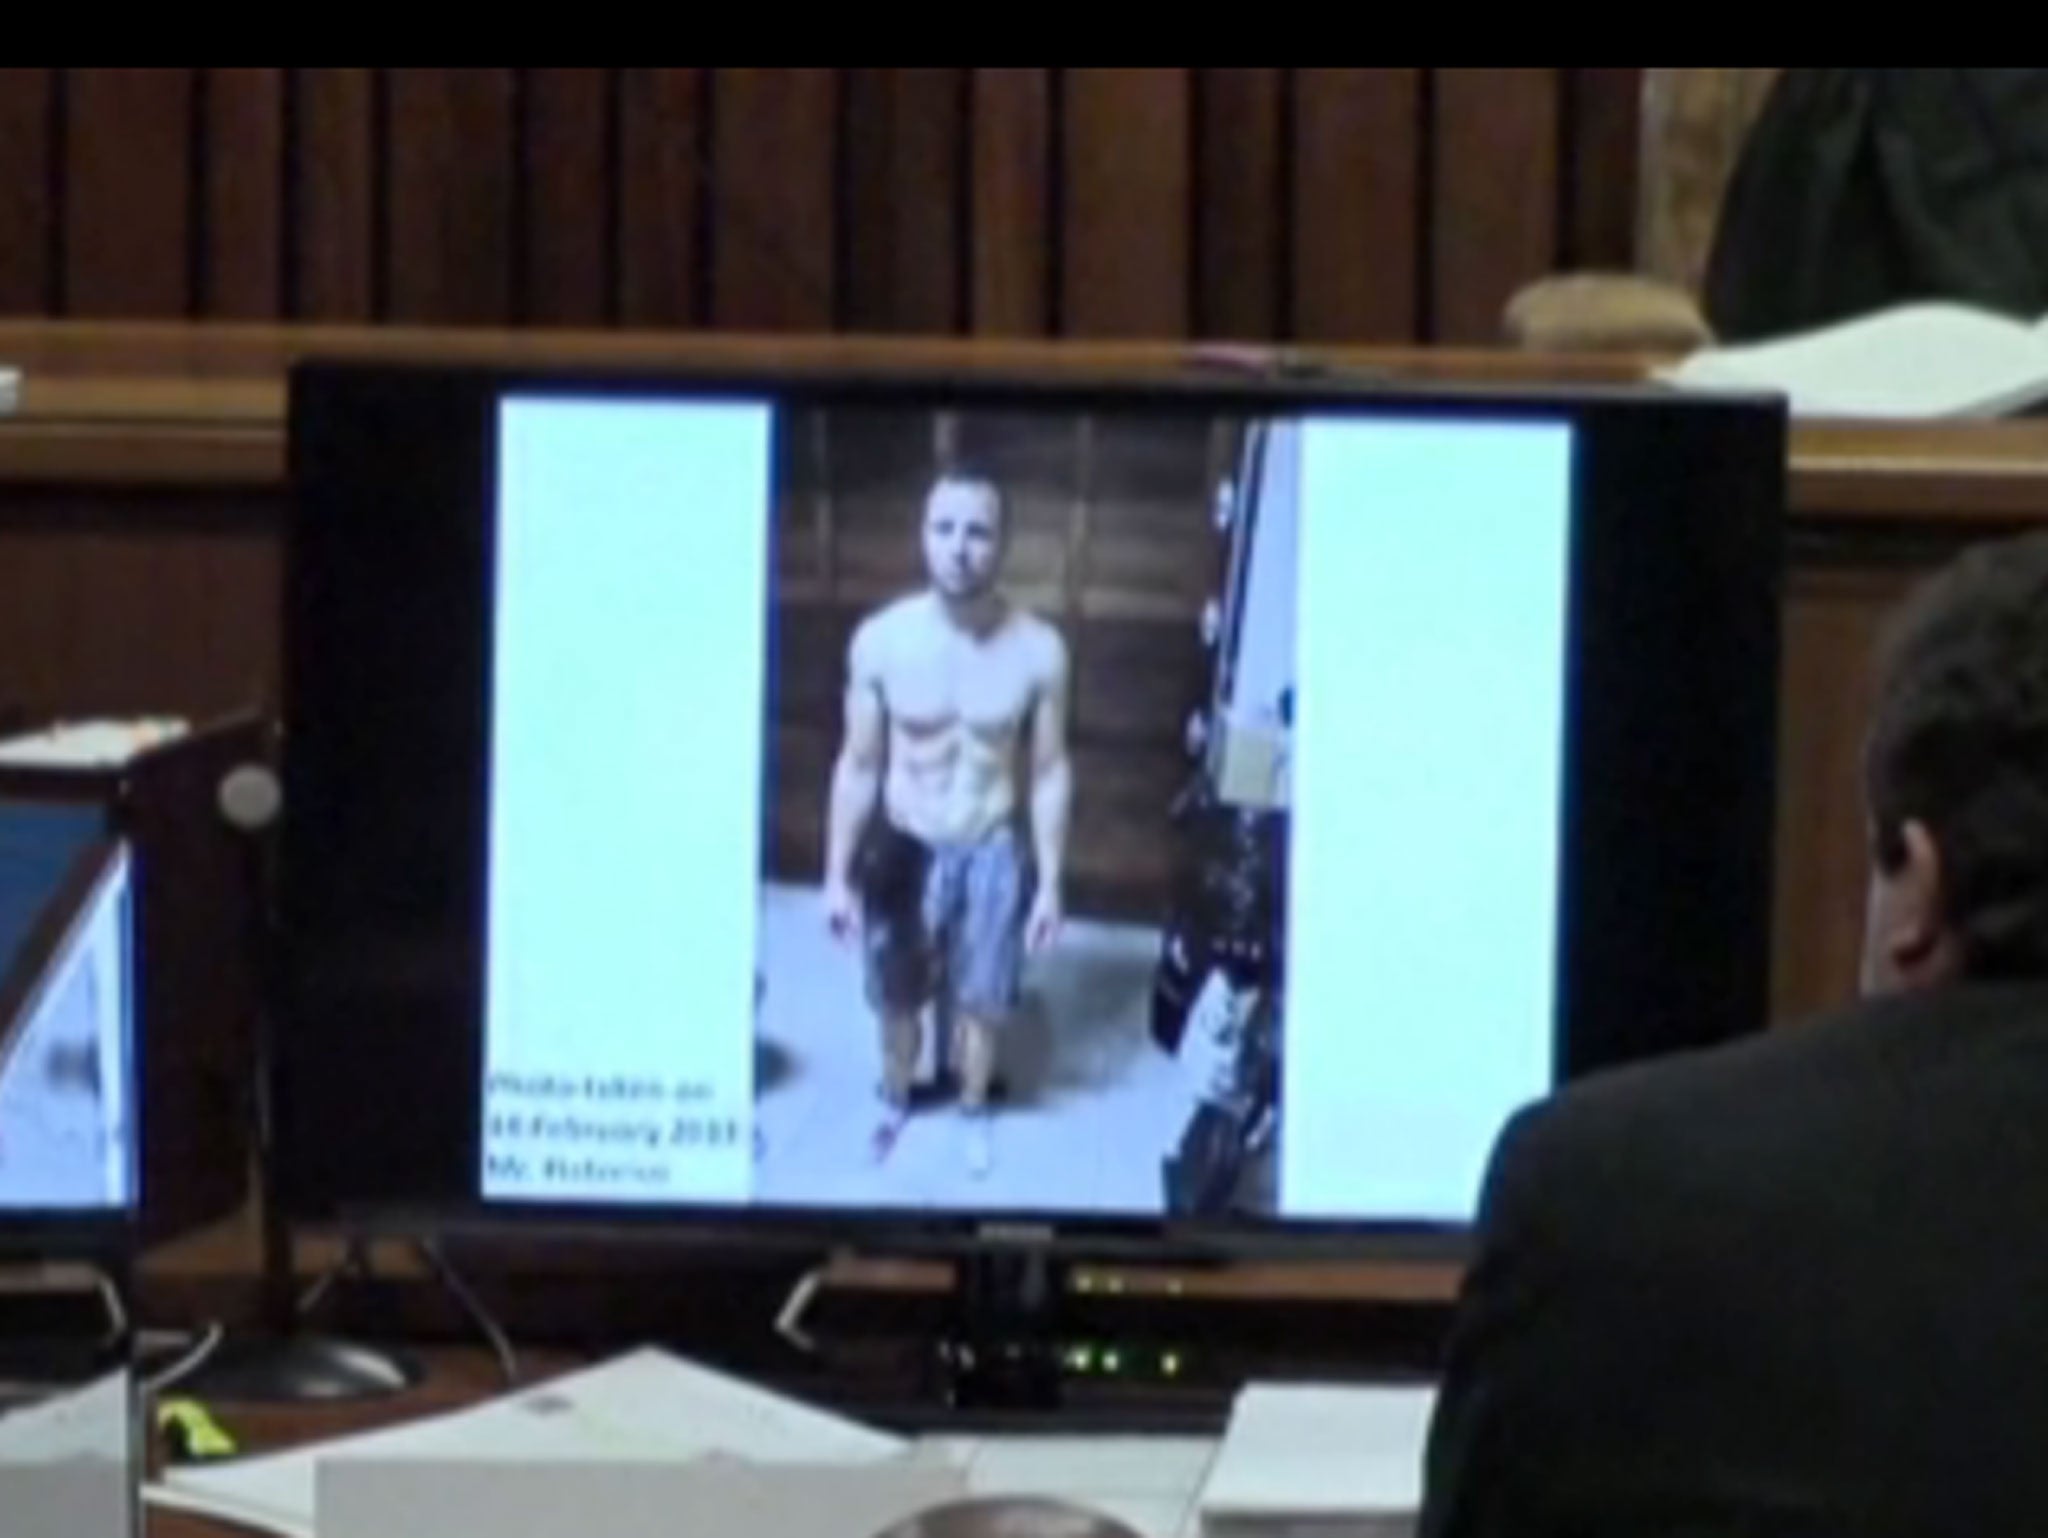 Photographs of Pistorius taken soon after fatal shooting of Reeva Steenkamp were shown in court. The athlete's prosthetic legs are splattered with blood